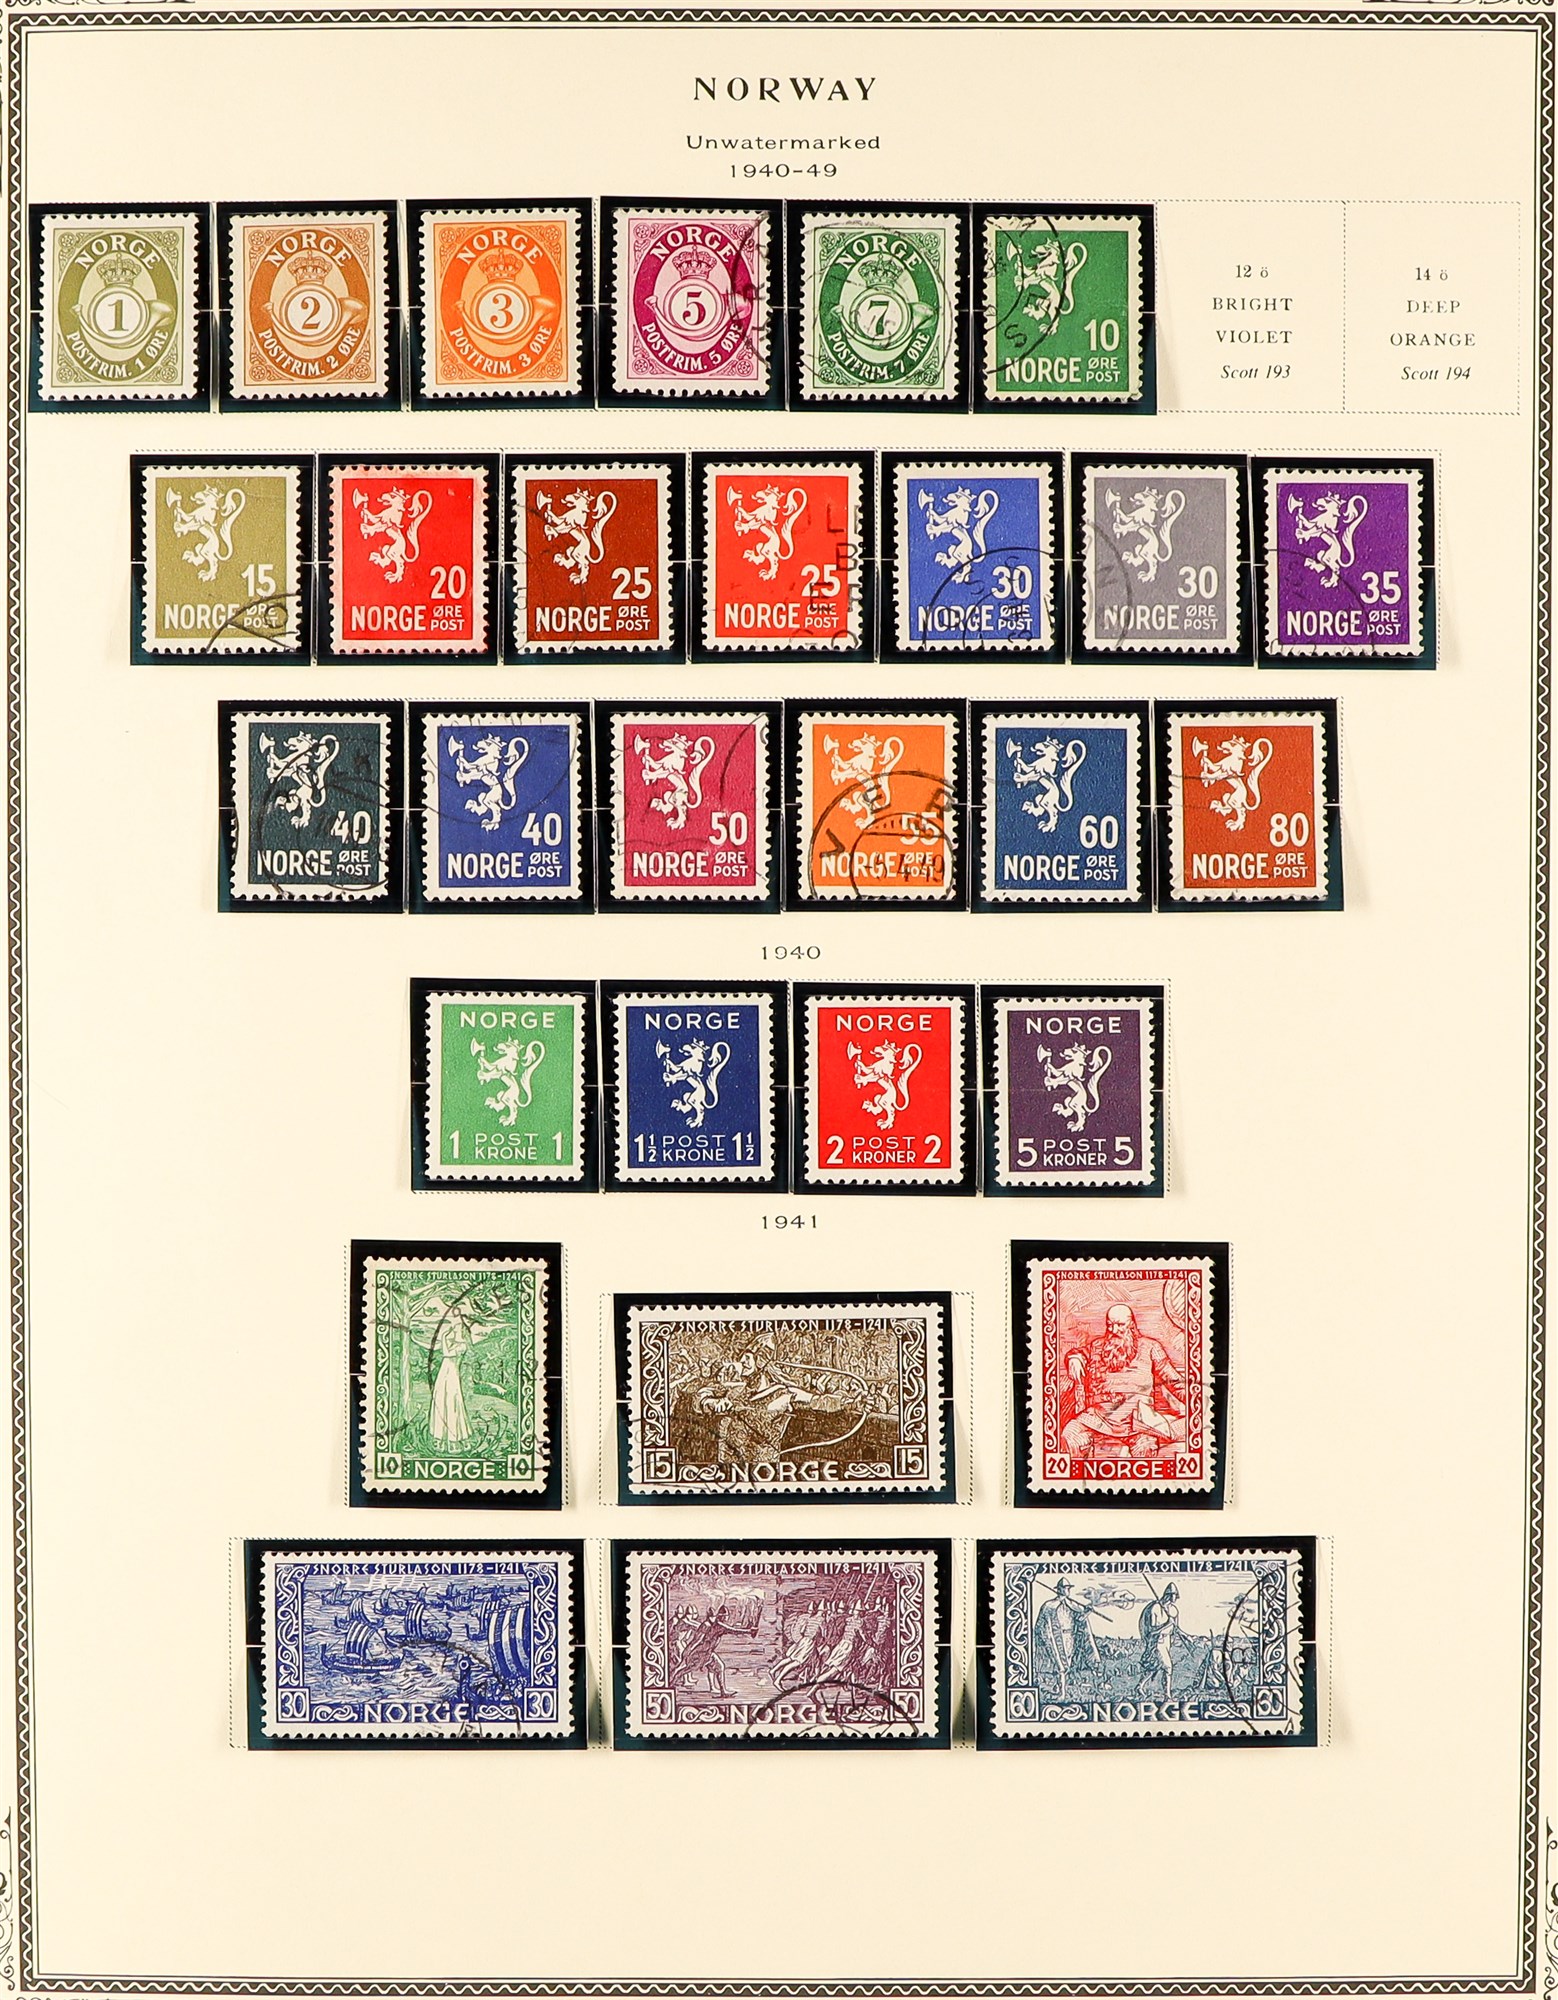 NORWAY 1855 - 1988 COLLECTION of stamps in Scott Specialty album (pages to 2002) of mint / never - Image 8 of 16